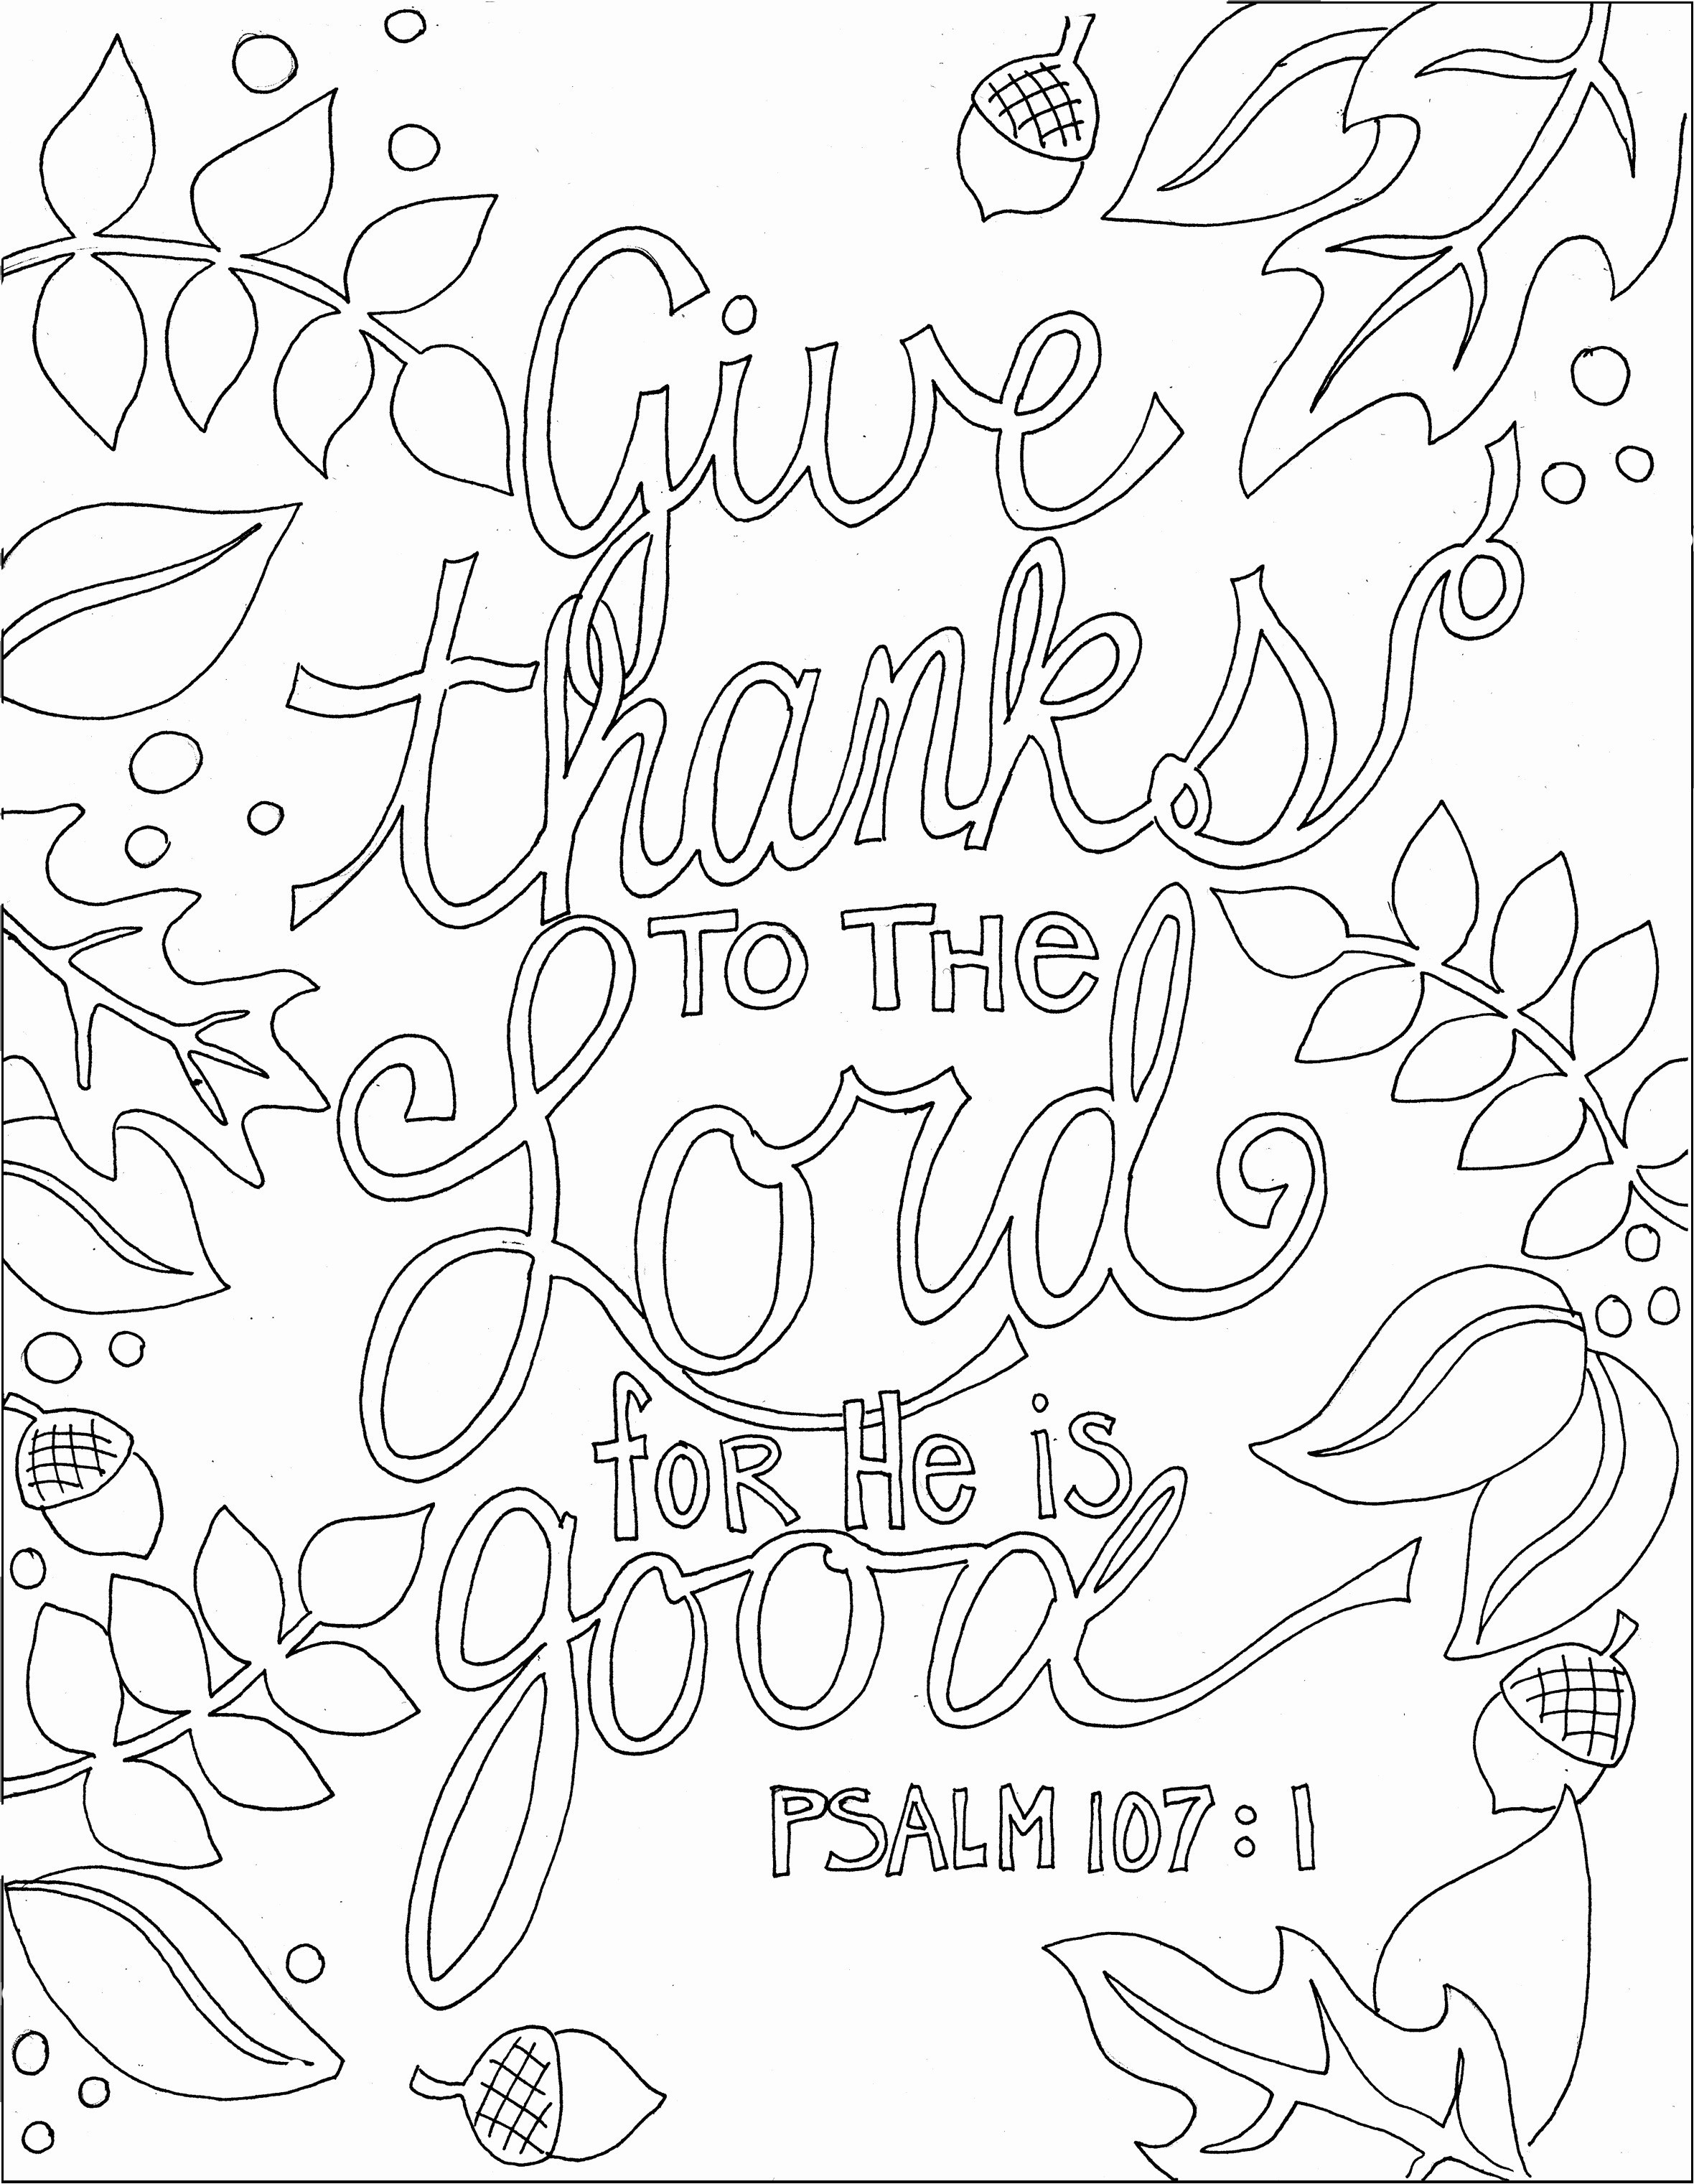 Coloring Pages Bible Stories Free Unique Bible Verse Coloring Pages - Free Printable Bible Coloring Pages With Scriptures